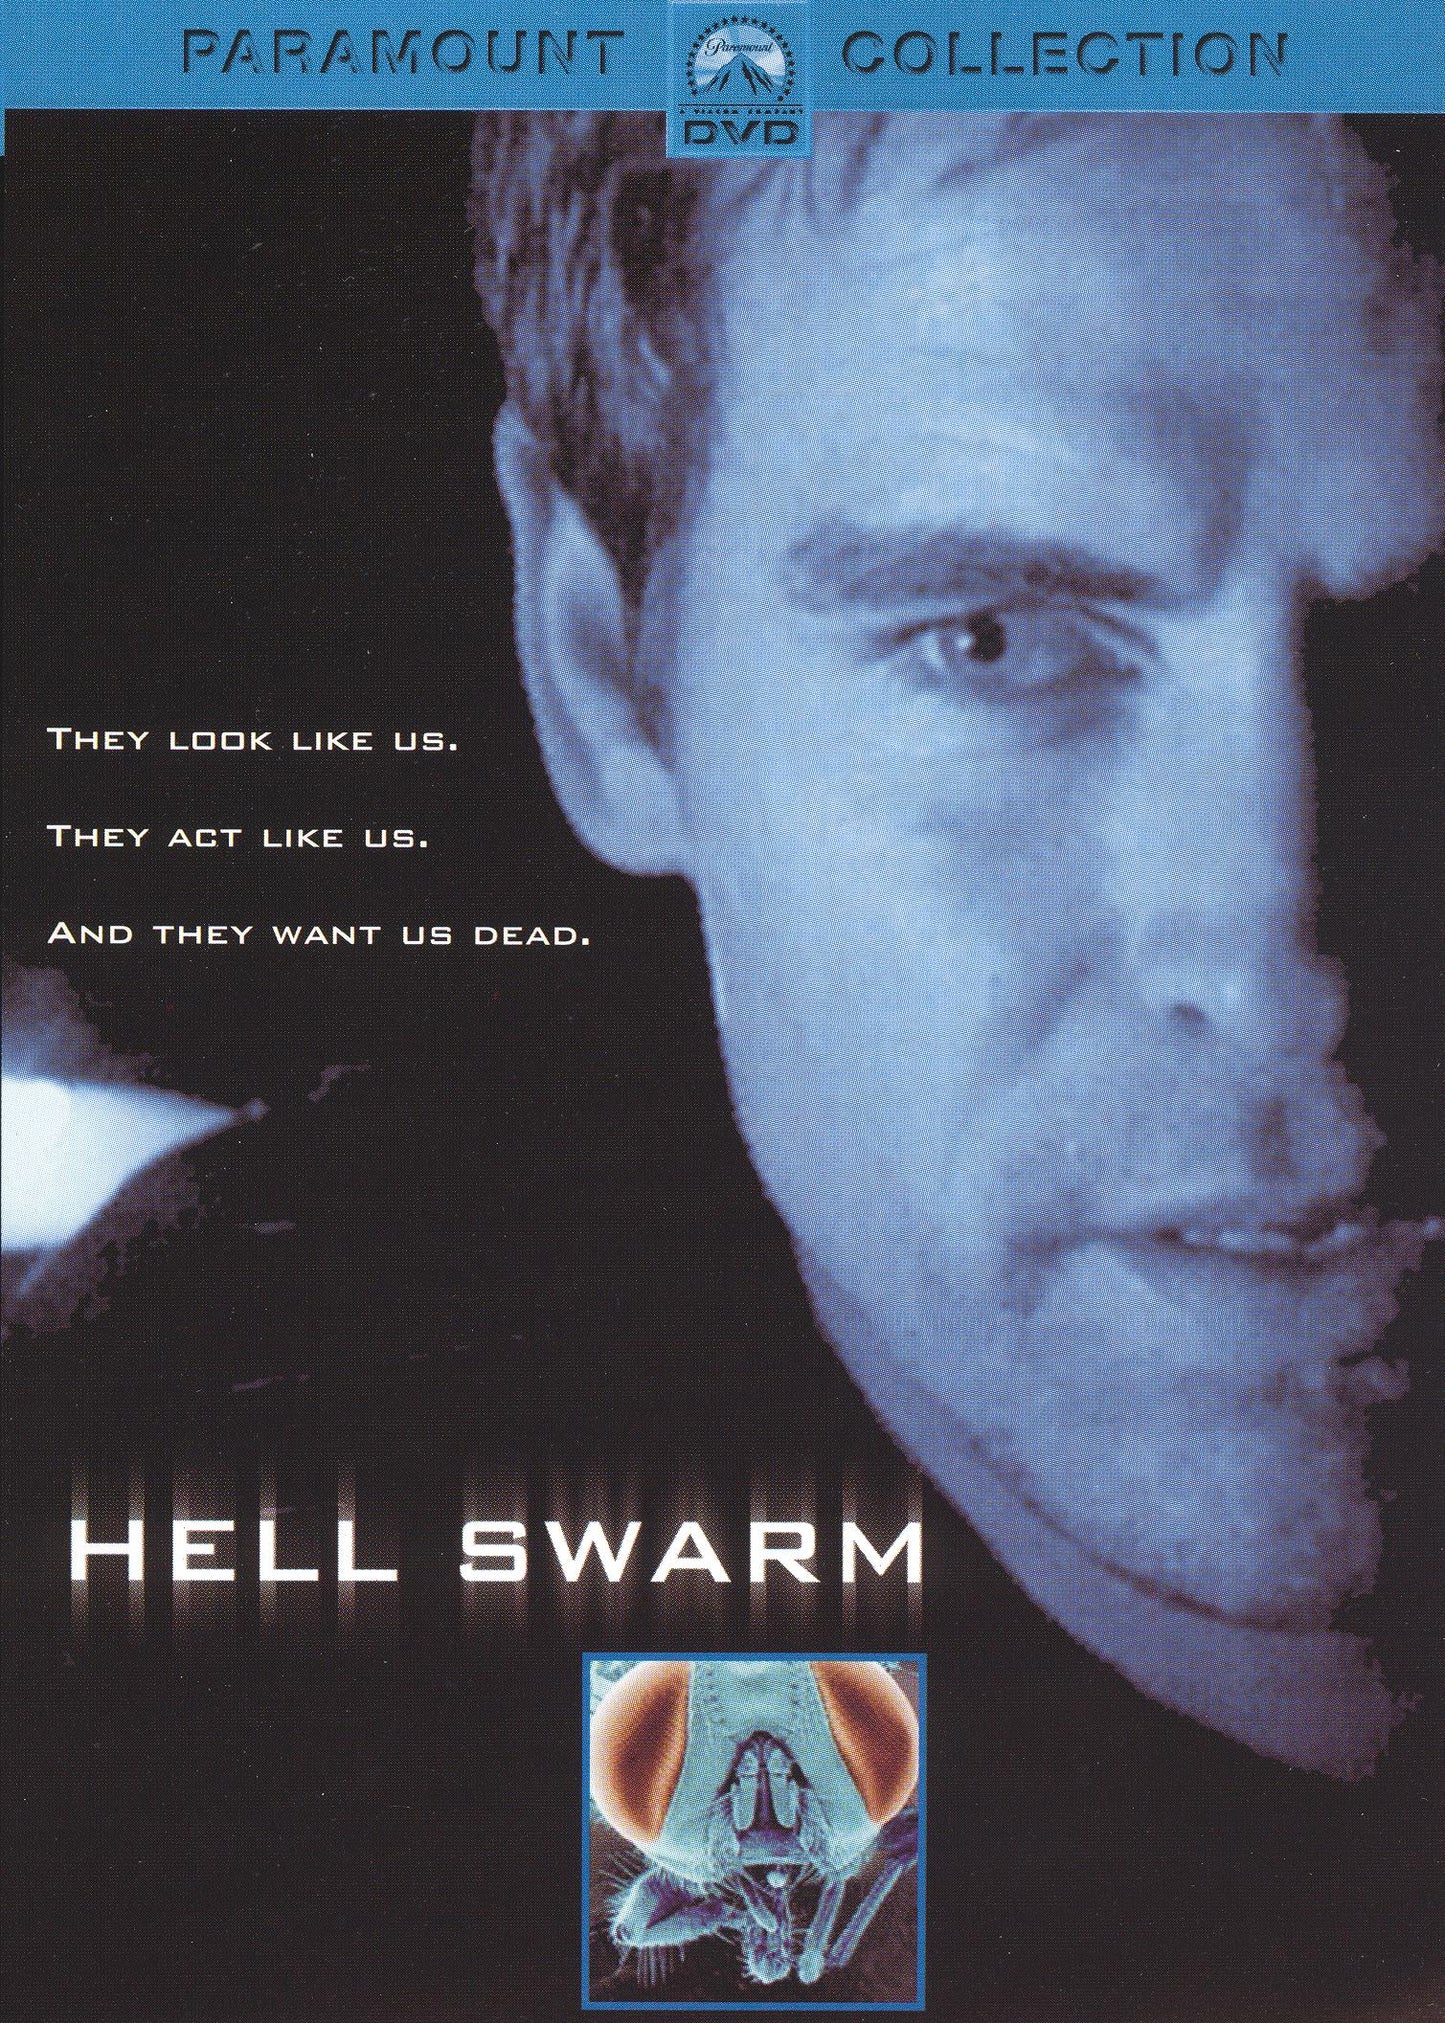 Hell Swarm cover art